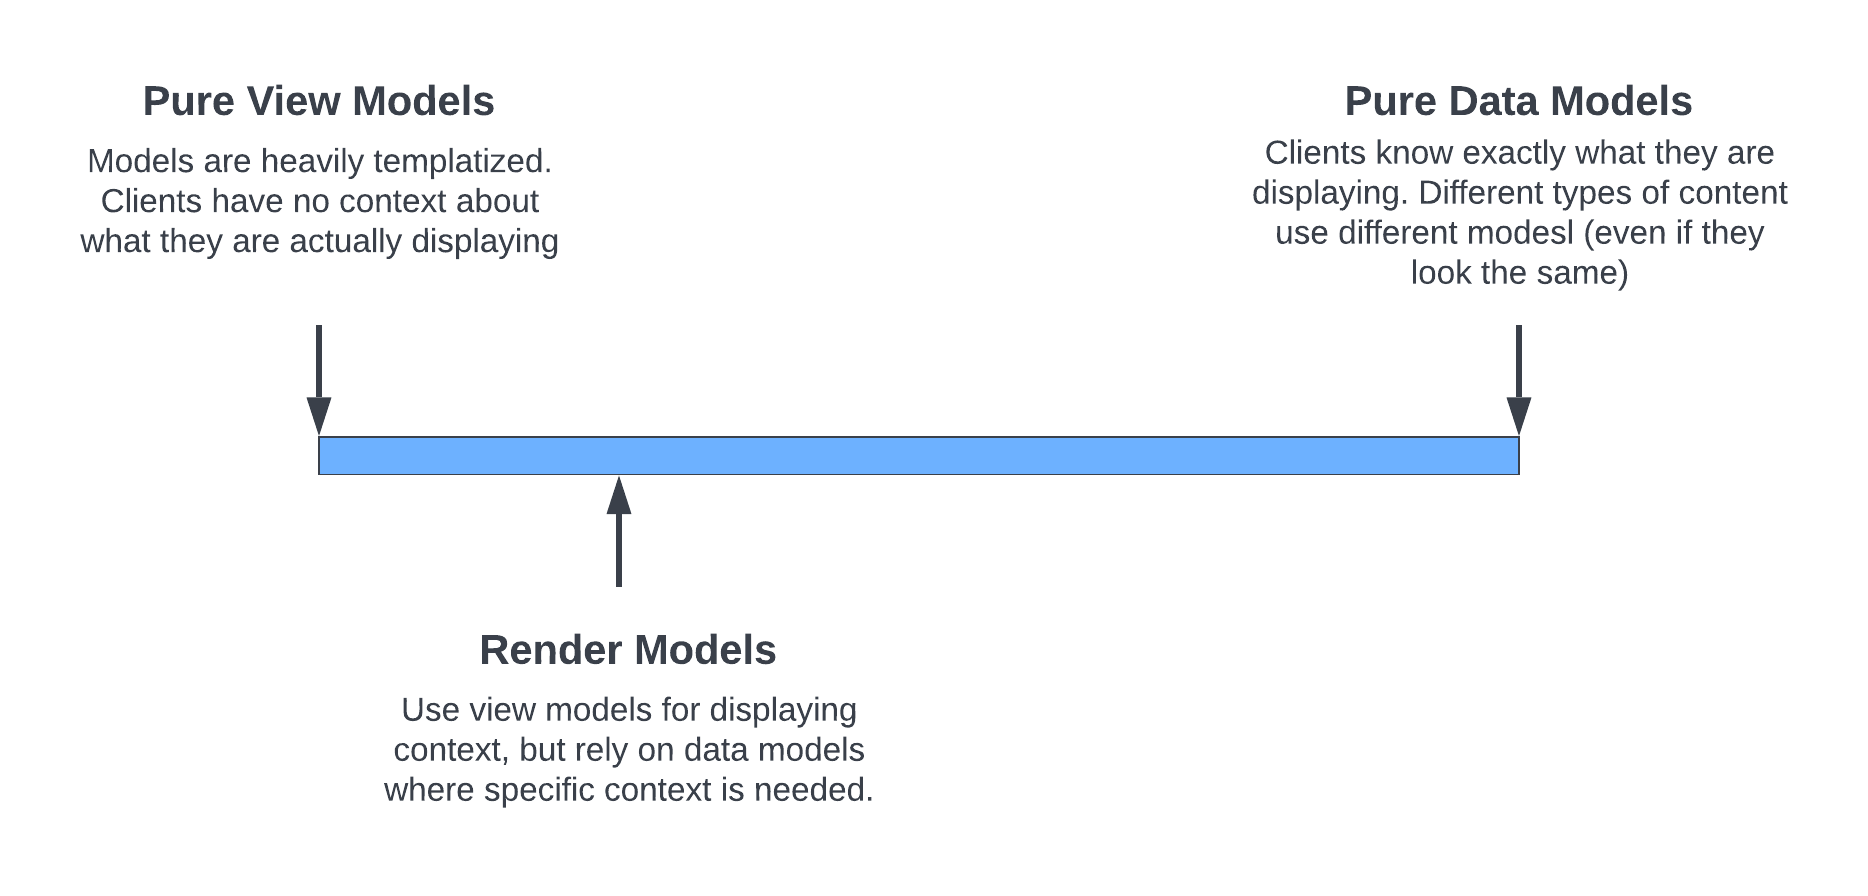 A diagram of a spectrum of modeling strategies between pure view models and pure data models